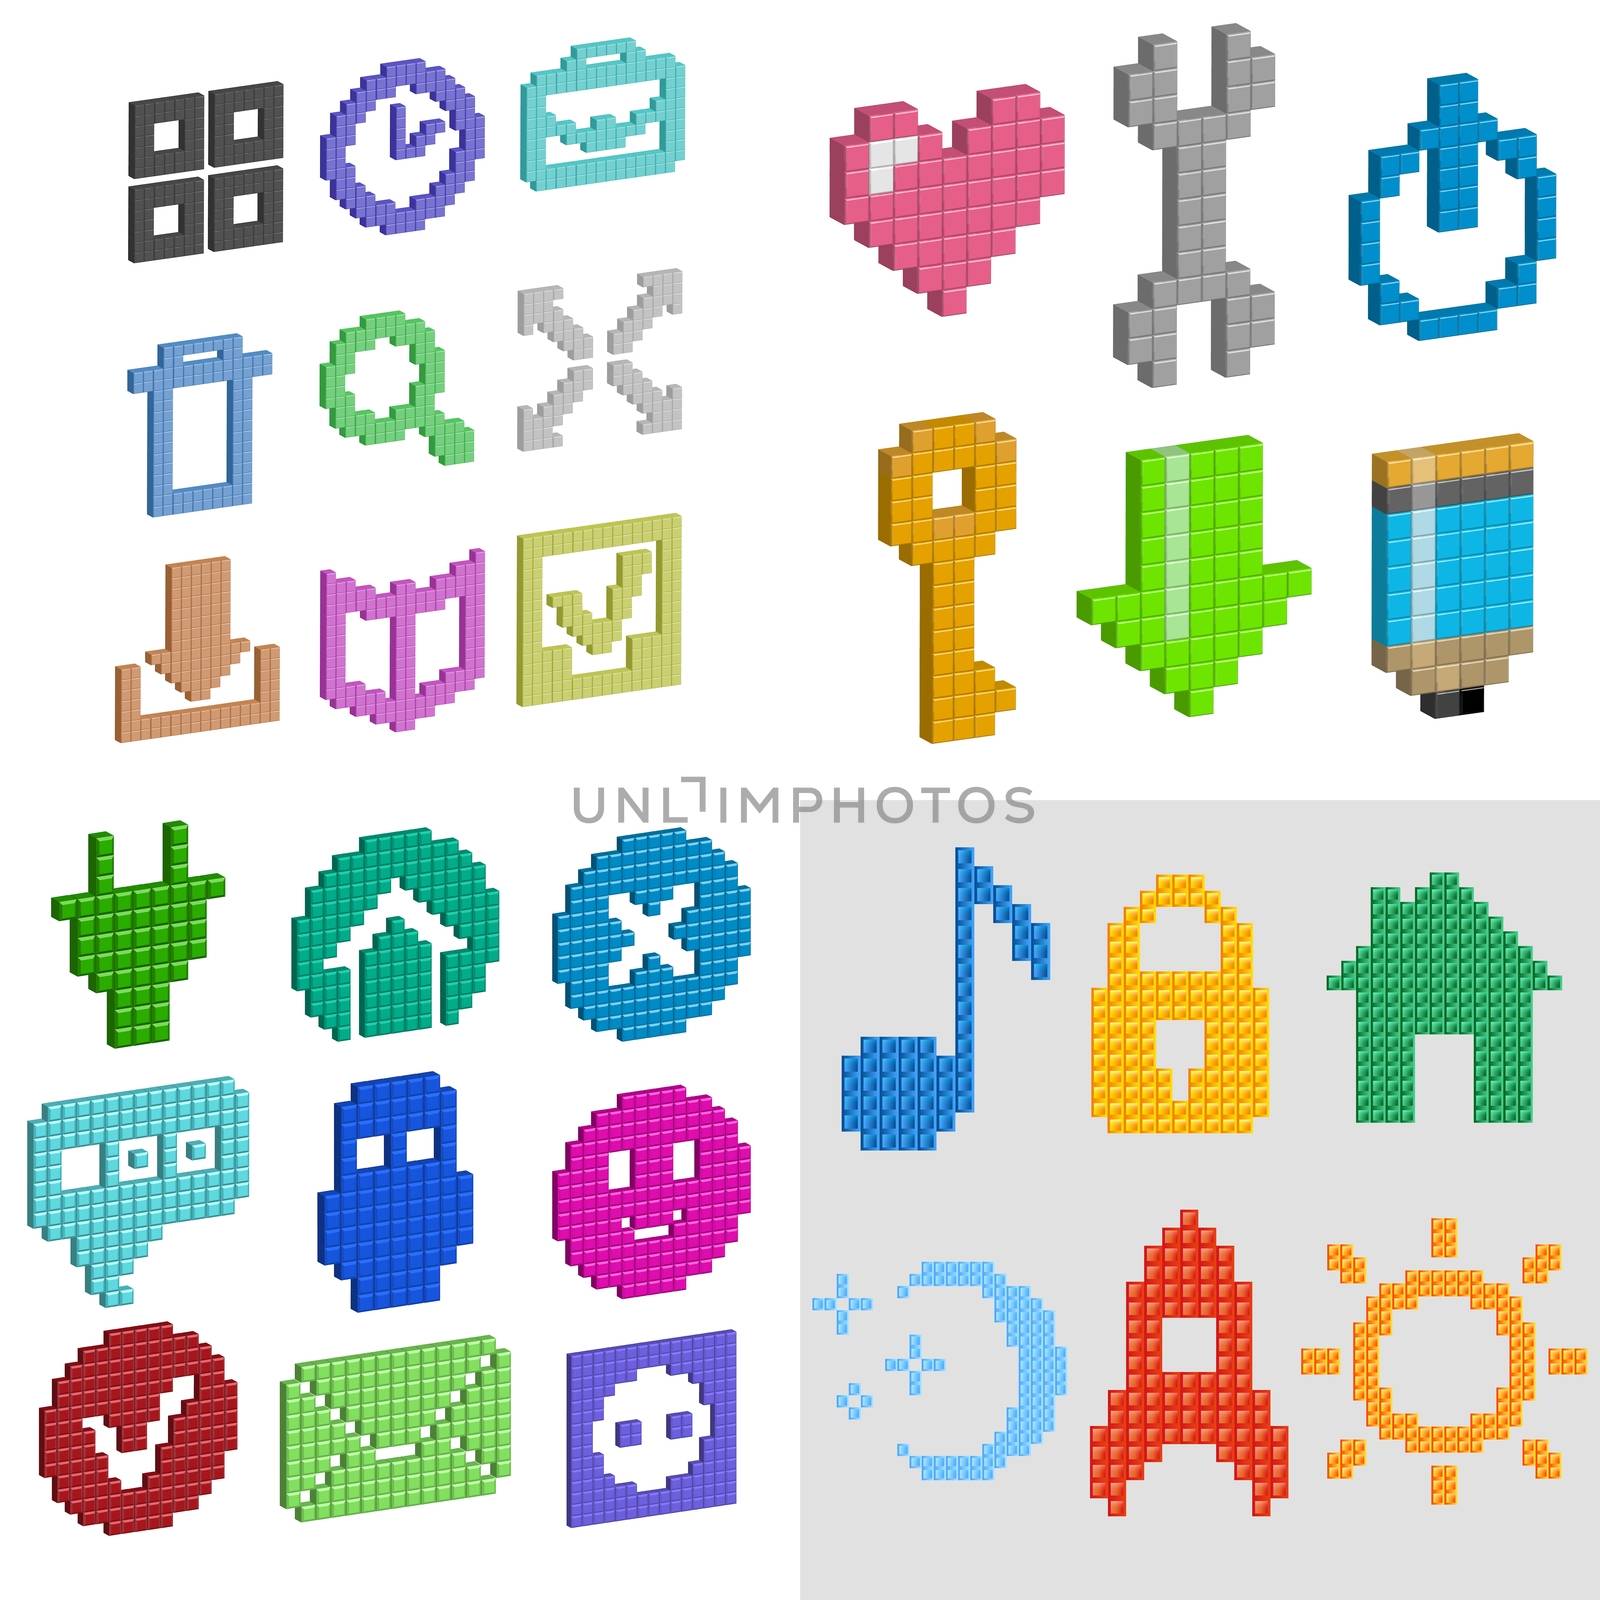 heart, wrench, power button load, pencil in pixel design illustration